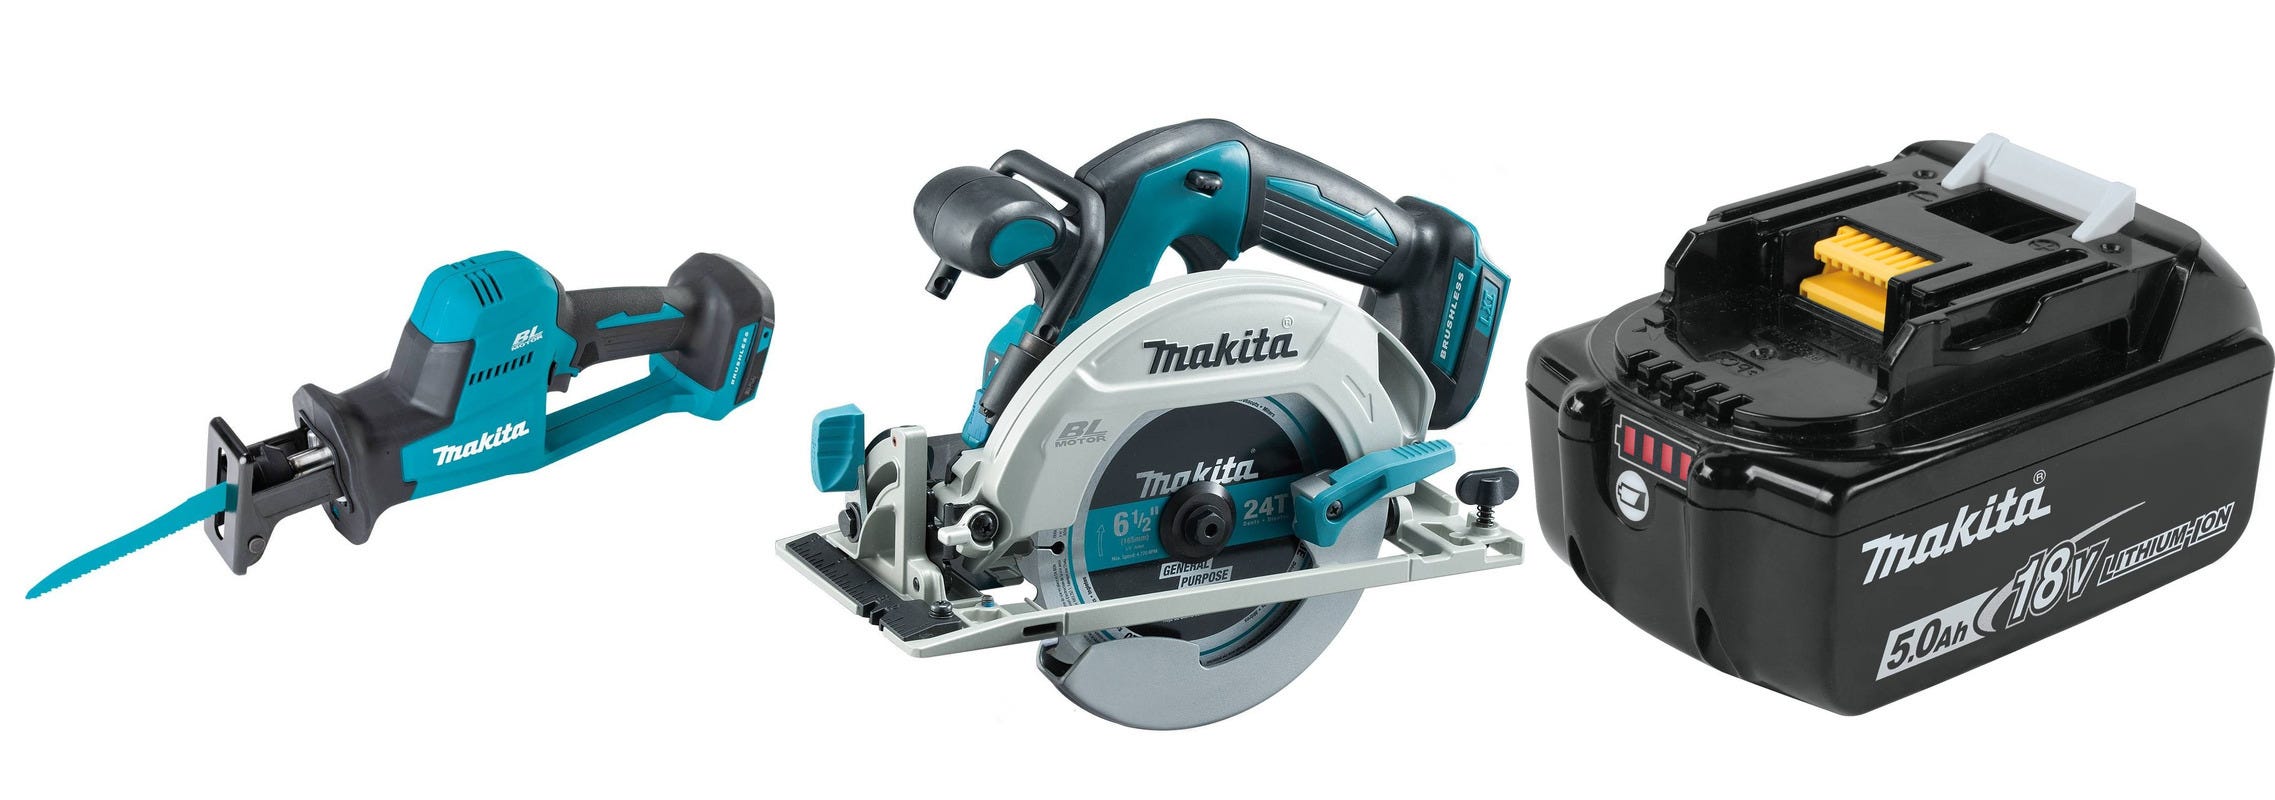 Have A Question About Makita 18V LXT Lithium-Ion Ah Battery With Bonus 18V  LXT Lithium-Ion Cordless 6-1/2 Lightweight Circular Saw? Pg The Home Depot 